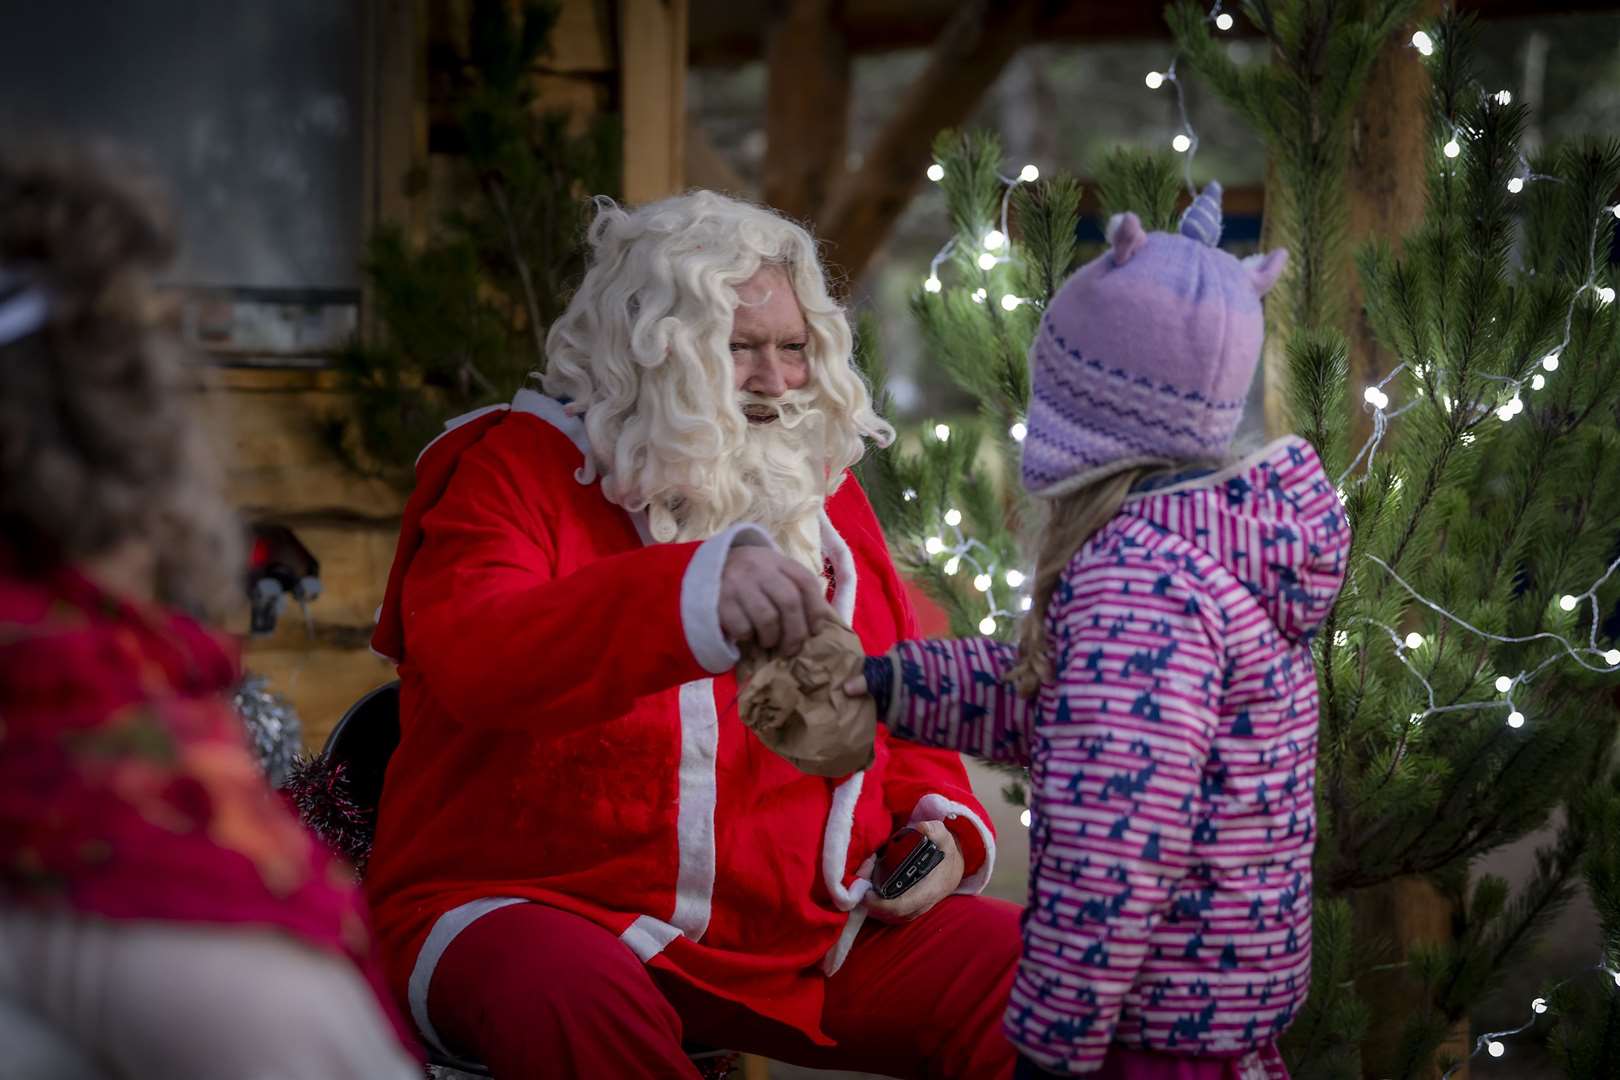 Santa sharing one of his small gifts. Pictures by Mark Richards